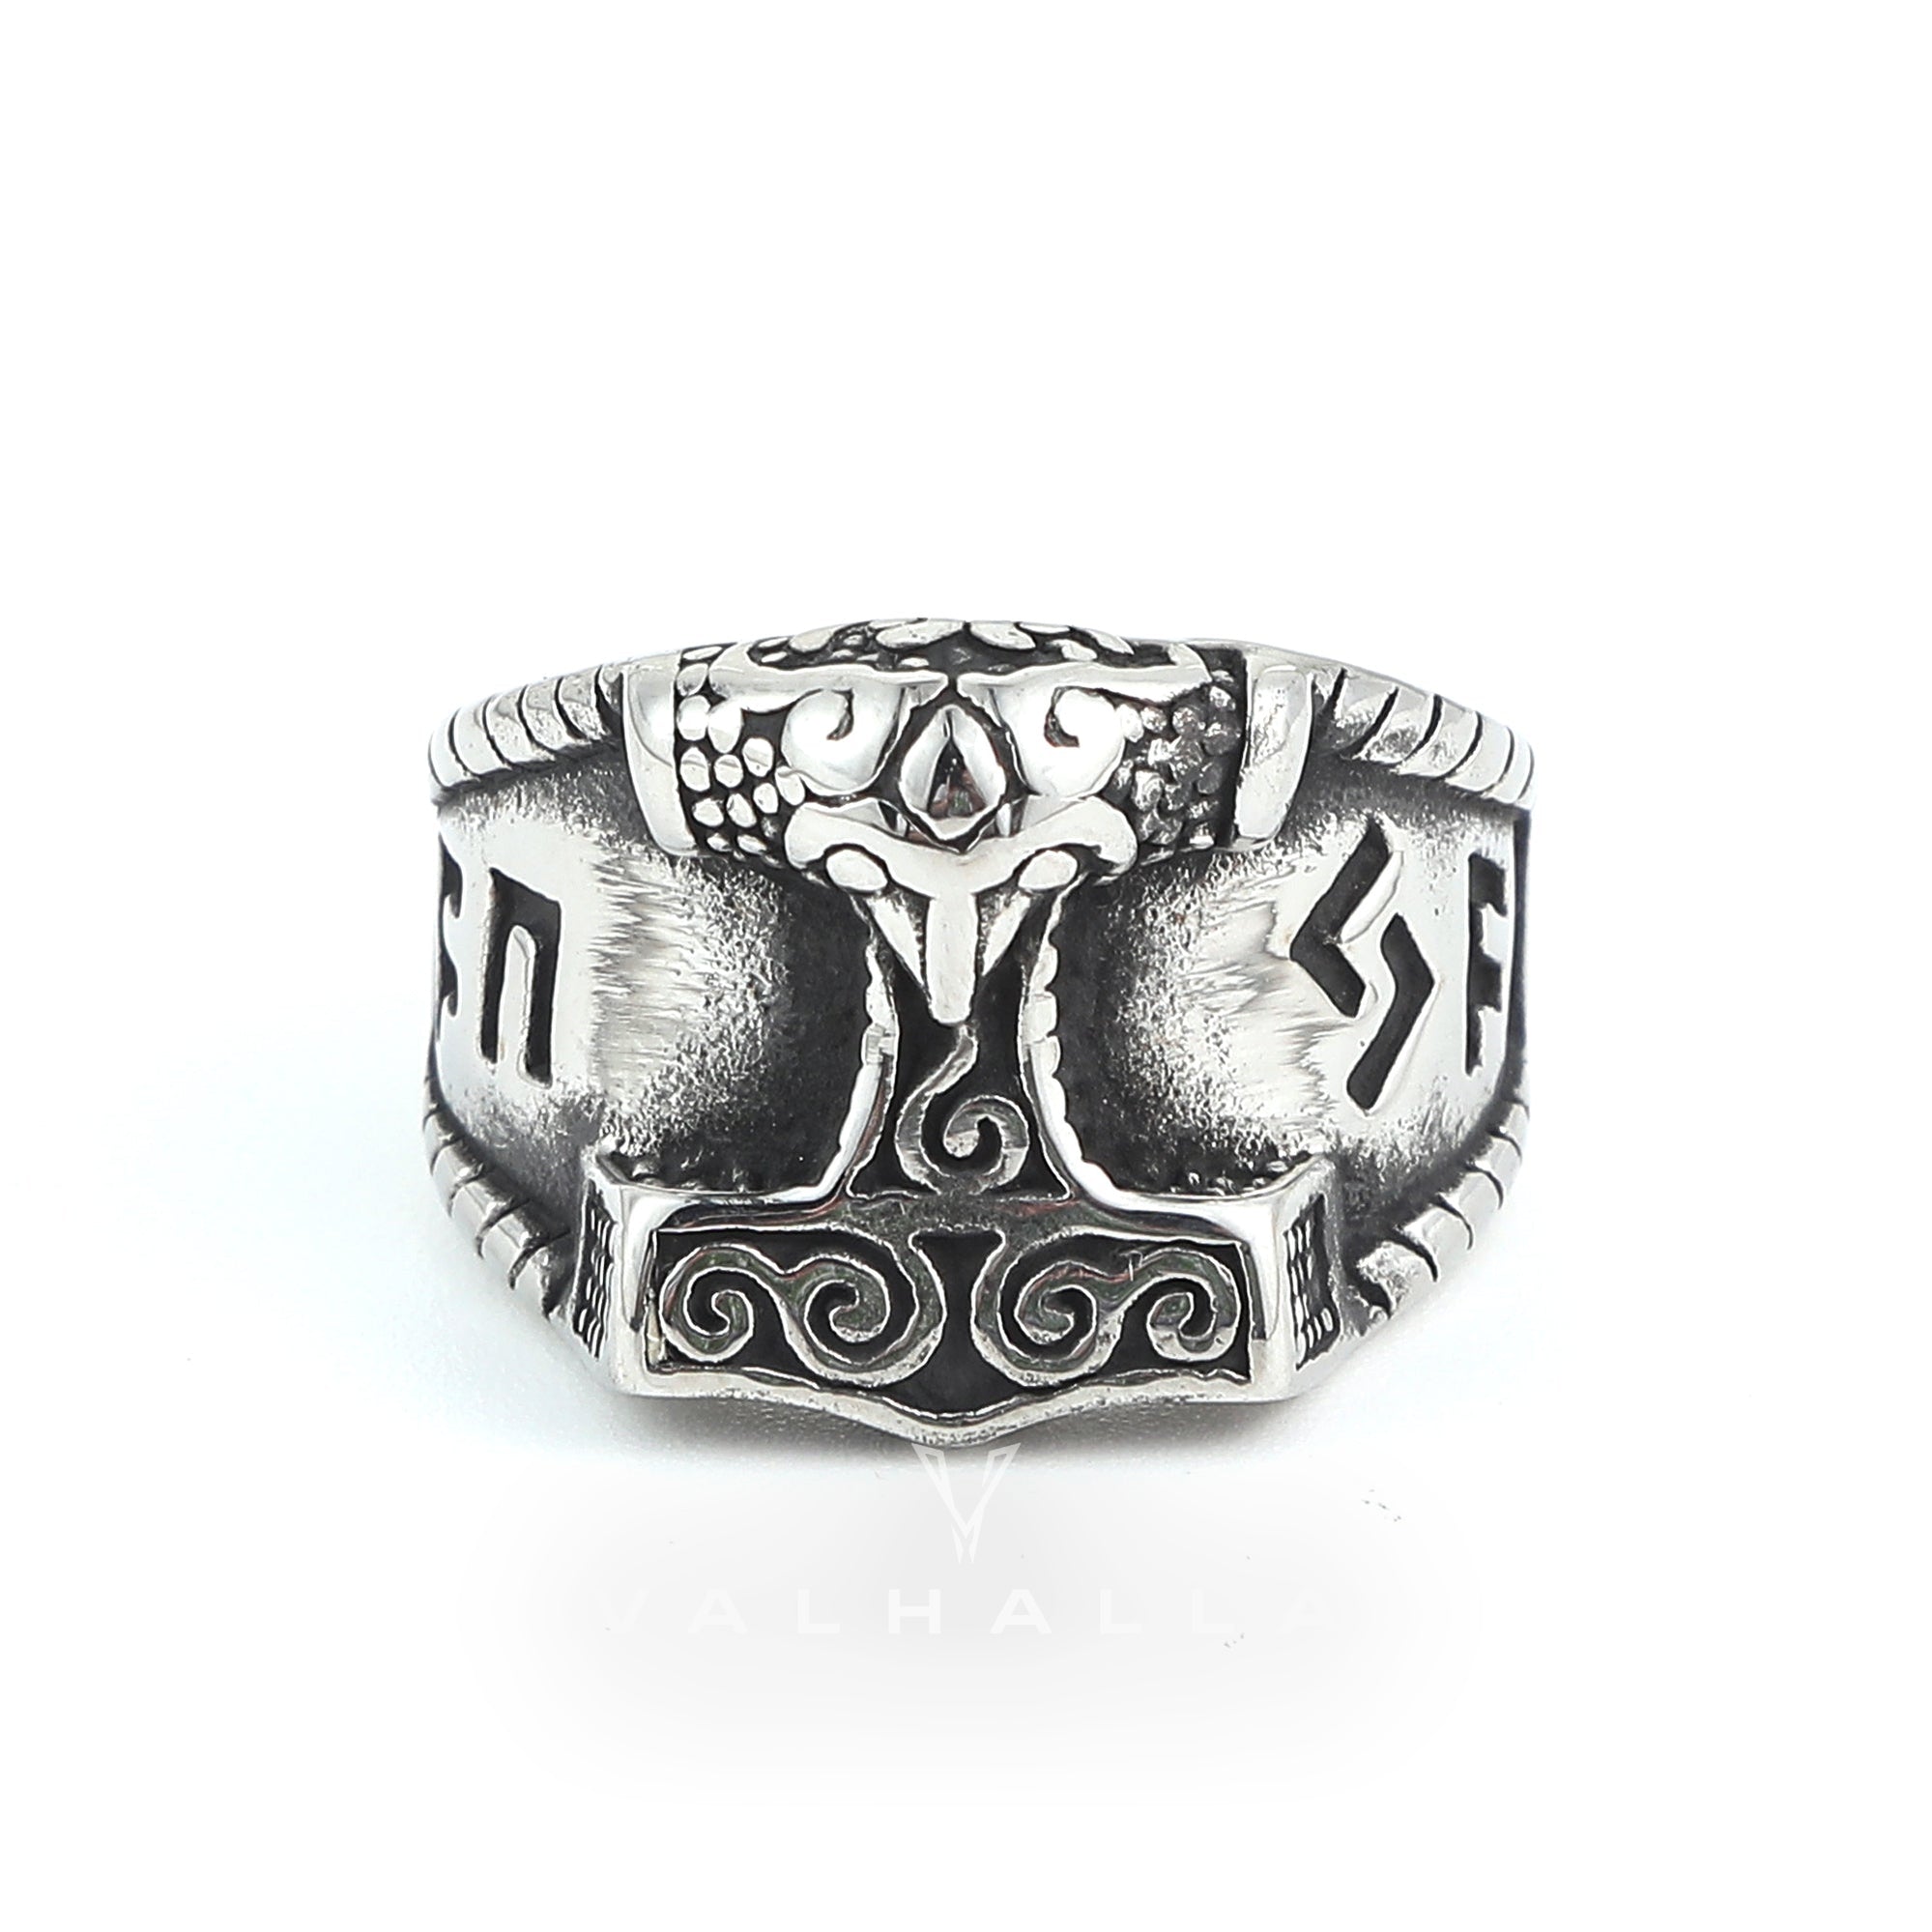 Handcrafted Stainless Steel Thor's Hammer and Rune Ring